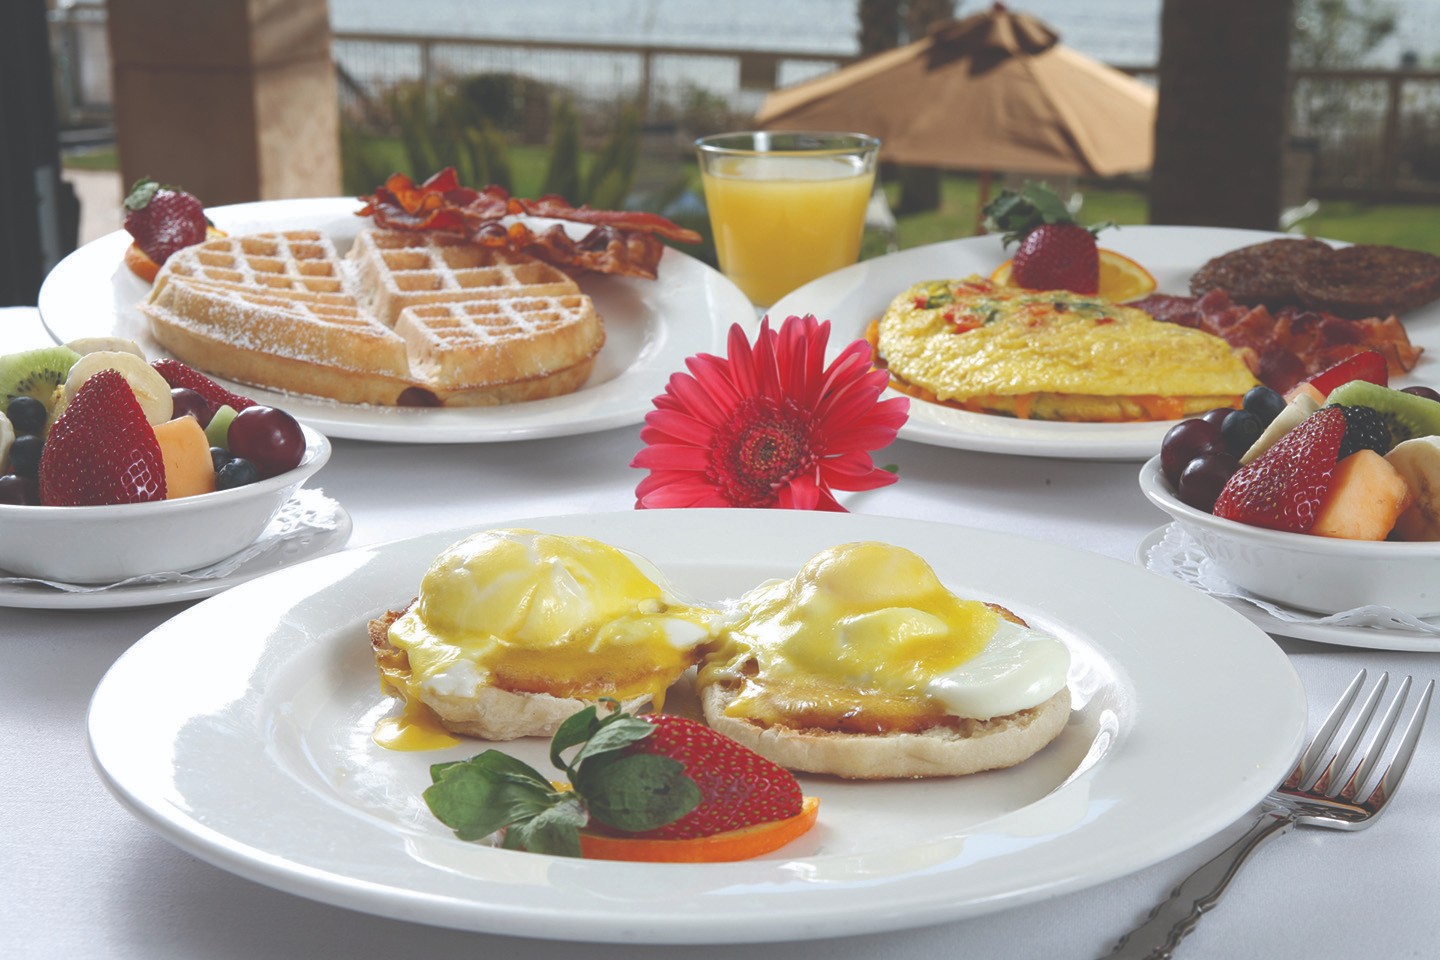 eggs Benedict, waffle, cheese omelet, and fruit bowl